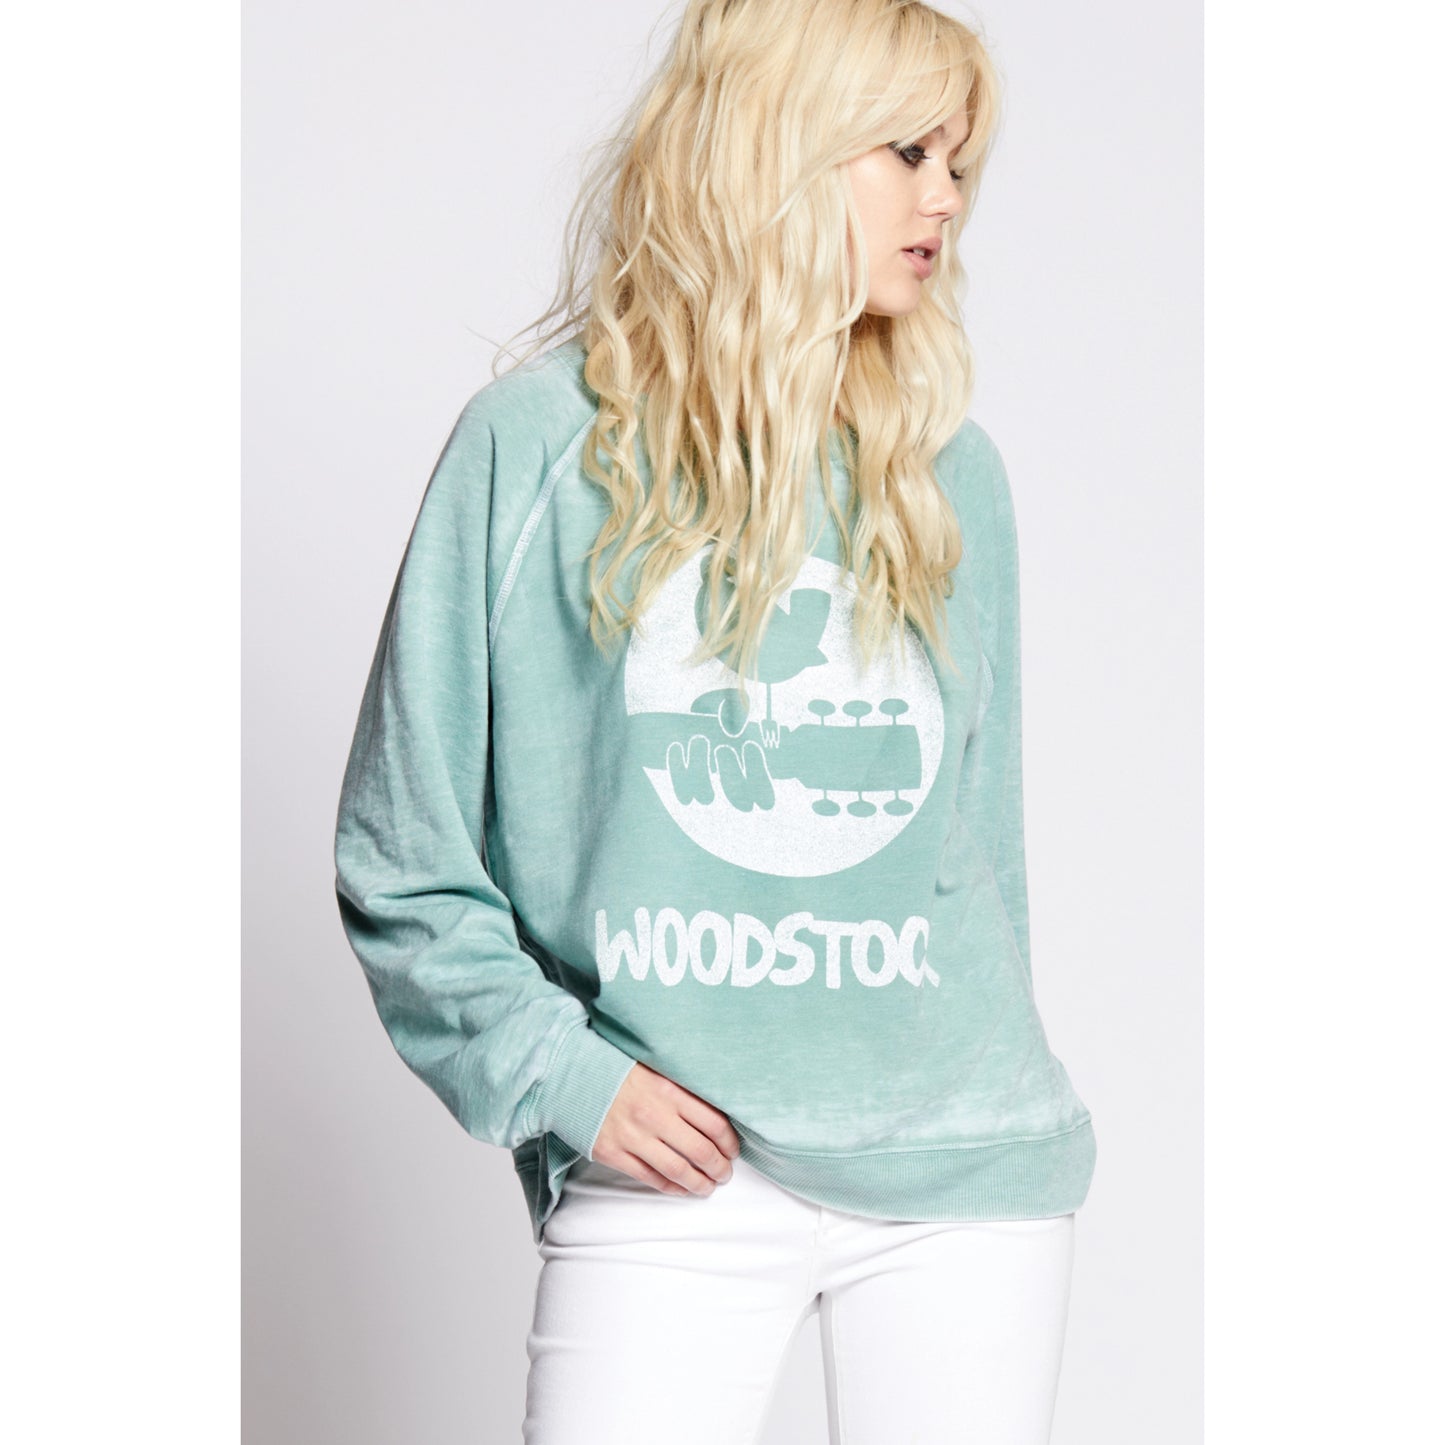 Recycled Karma Woodstock Symbol Sweatshirt. available at The Good Life Boutique